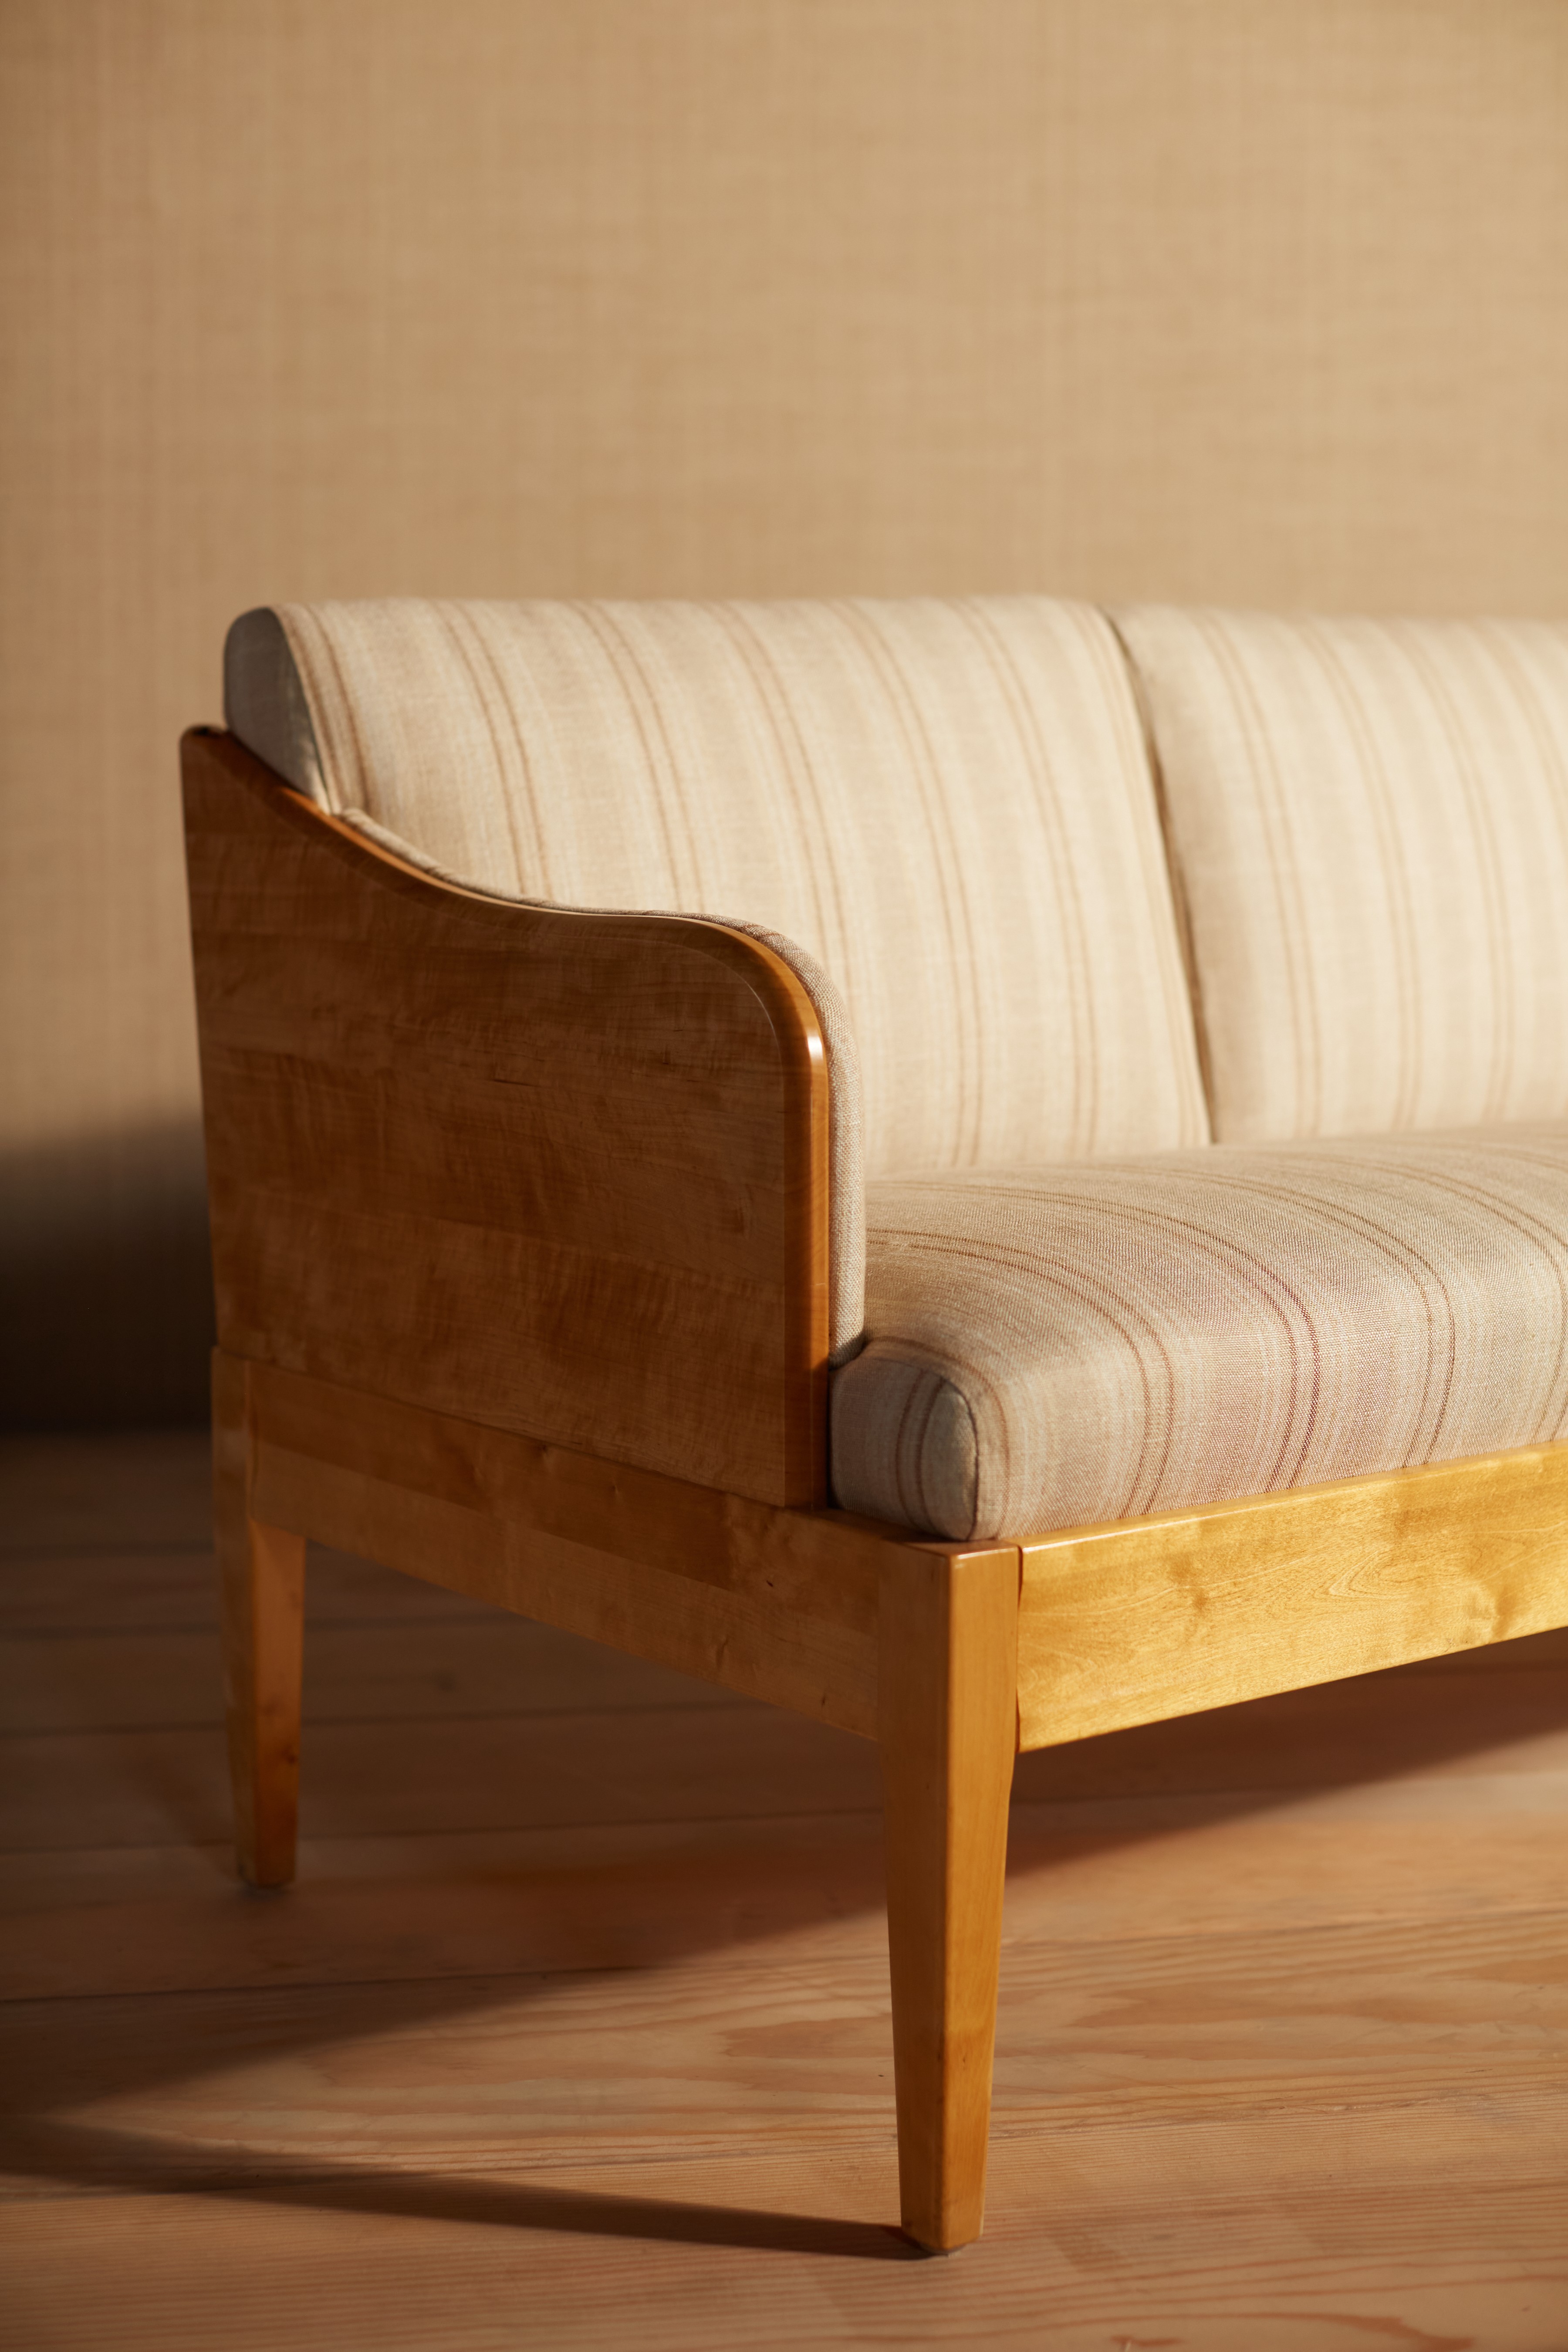 a wooden couch sitting on top of a hard wood floor